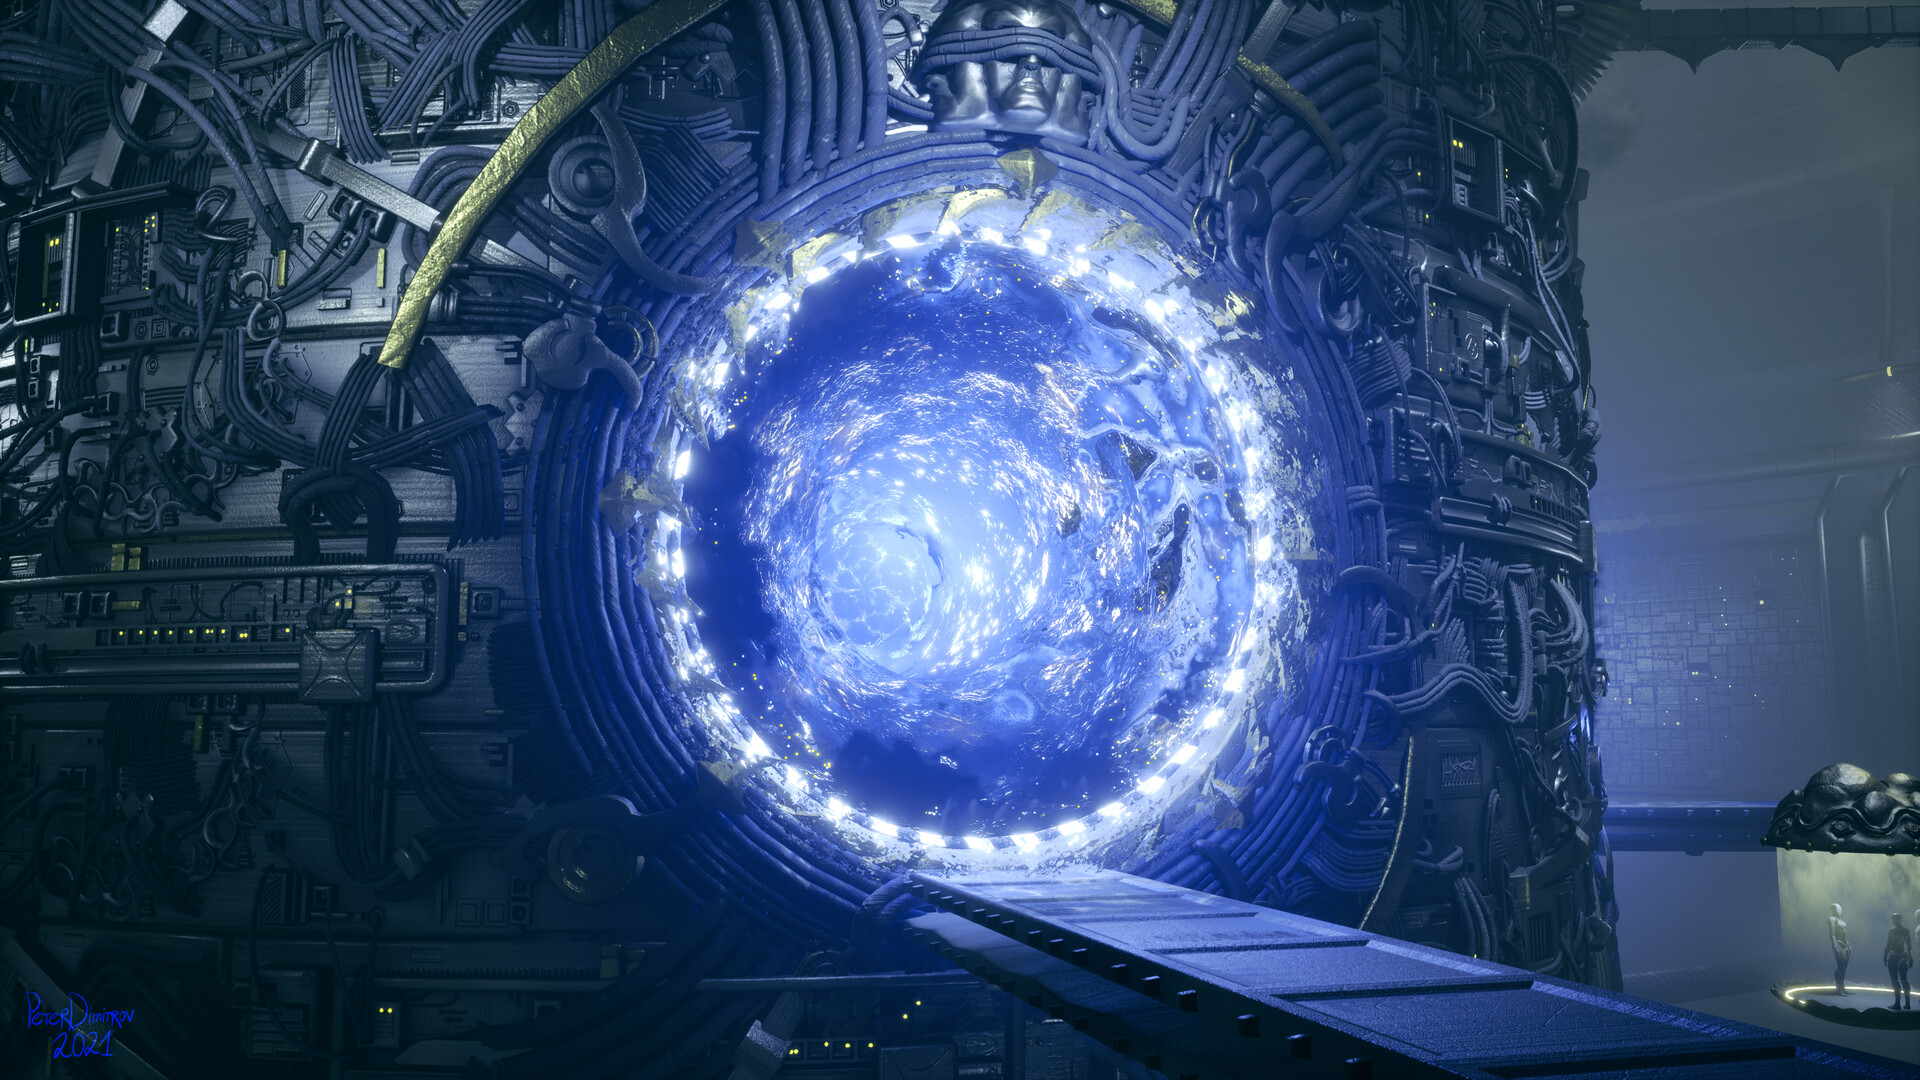 Close up screenshot of the portal, active. Blue tones complimented by sparks of yellow and white.